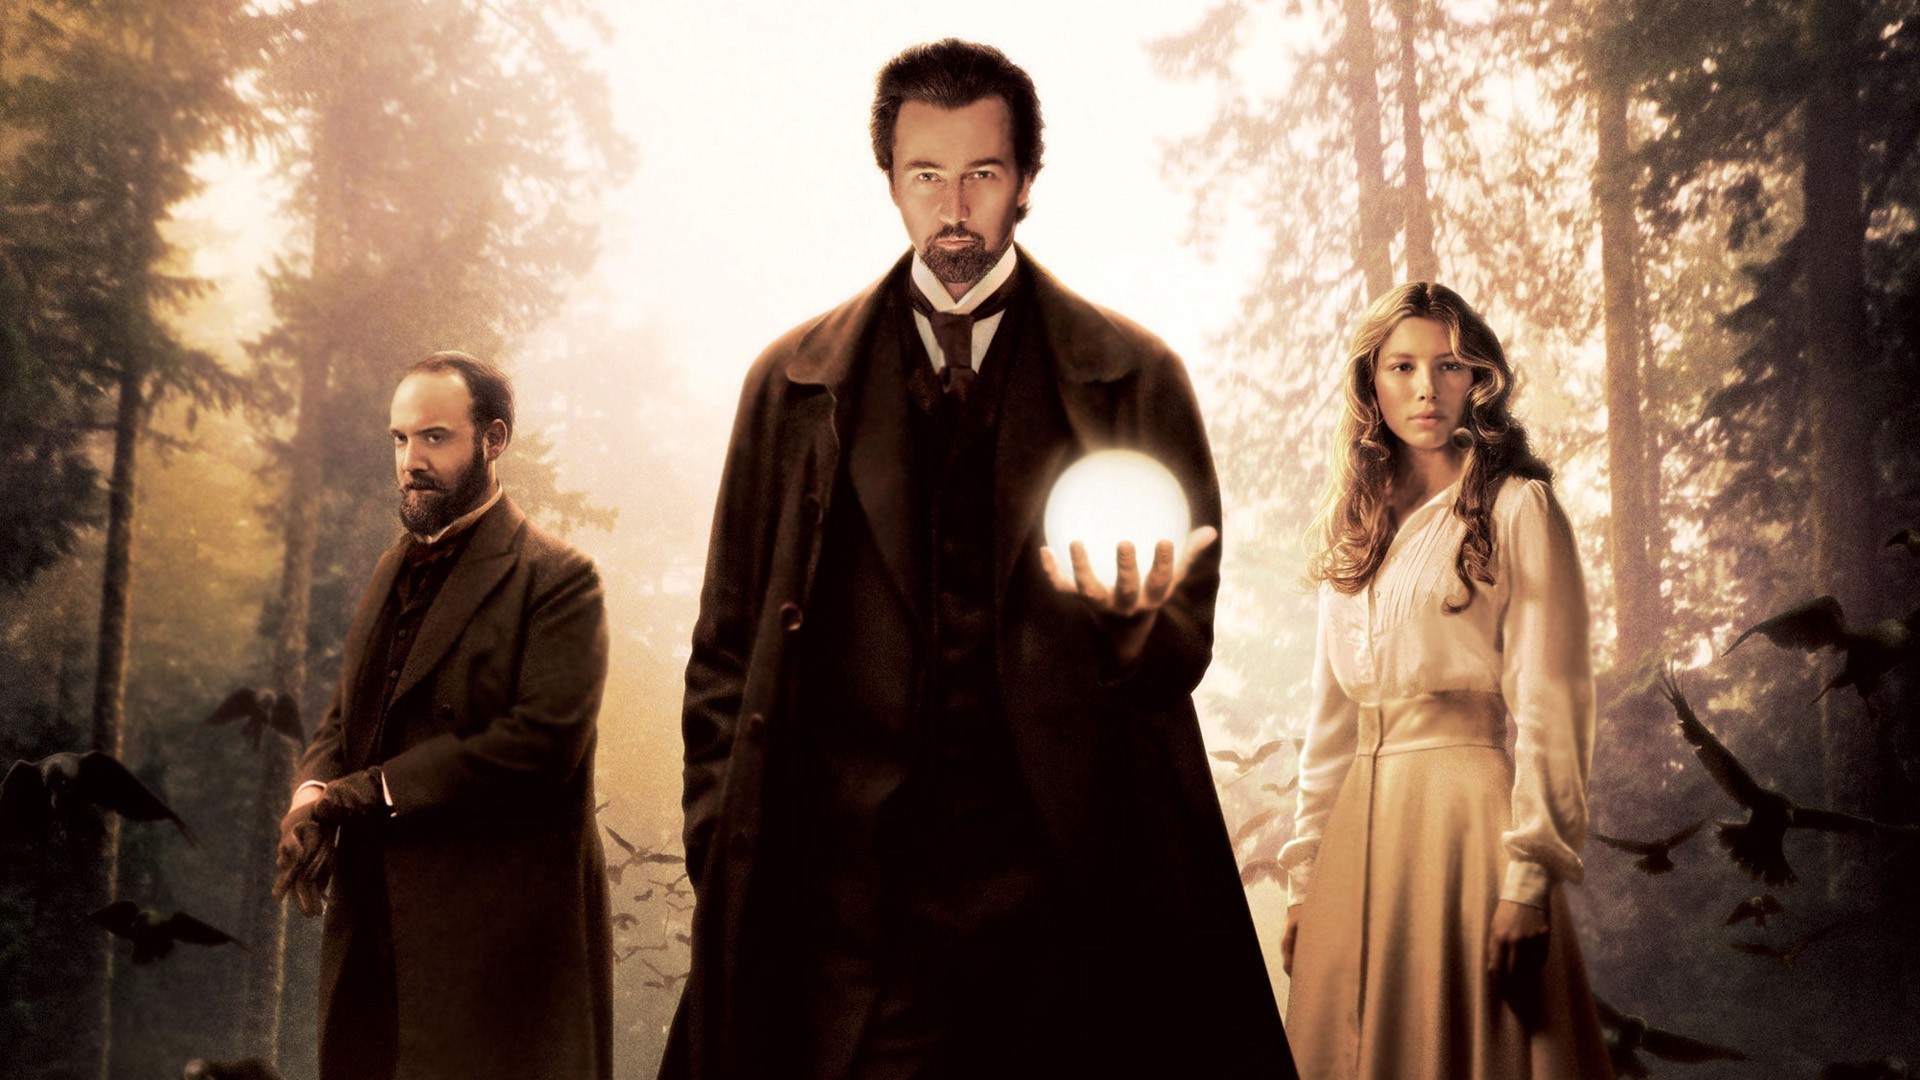 The Illusionist HD Wallpaper Background Image 1920x1080 1920x1080